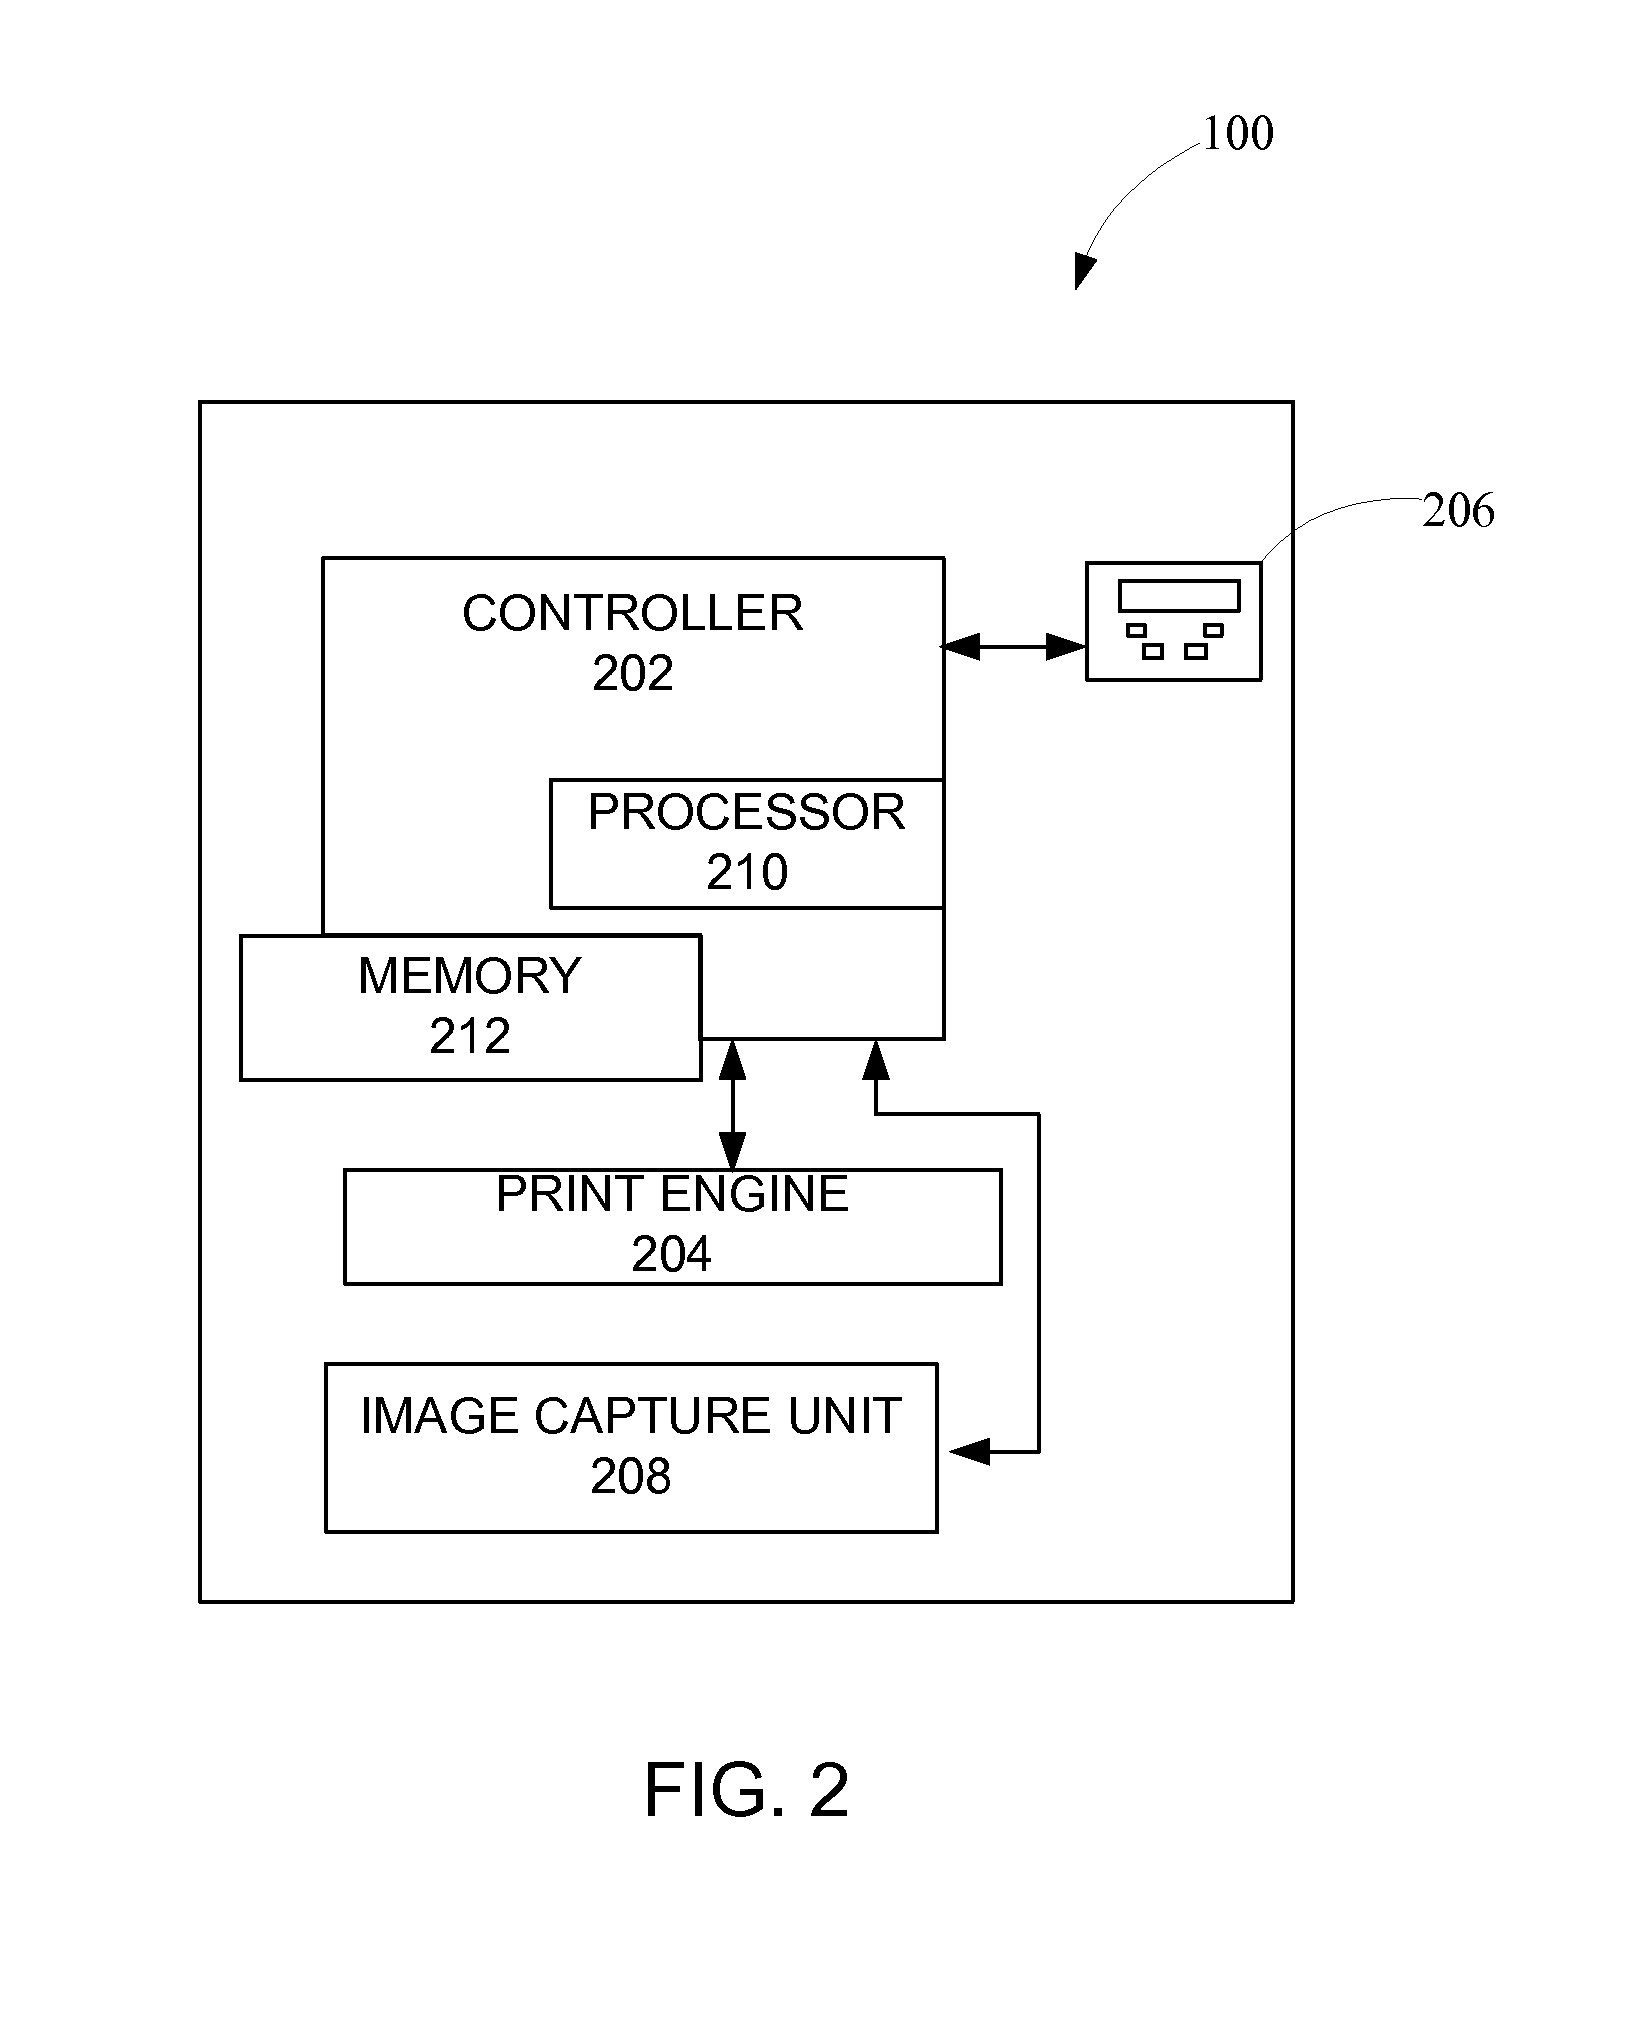 Method and system for reducing speckles in a captured image